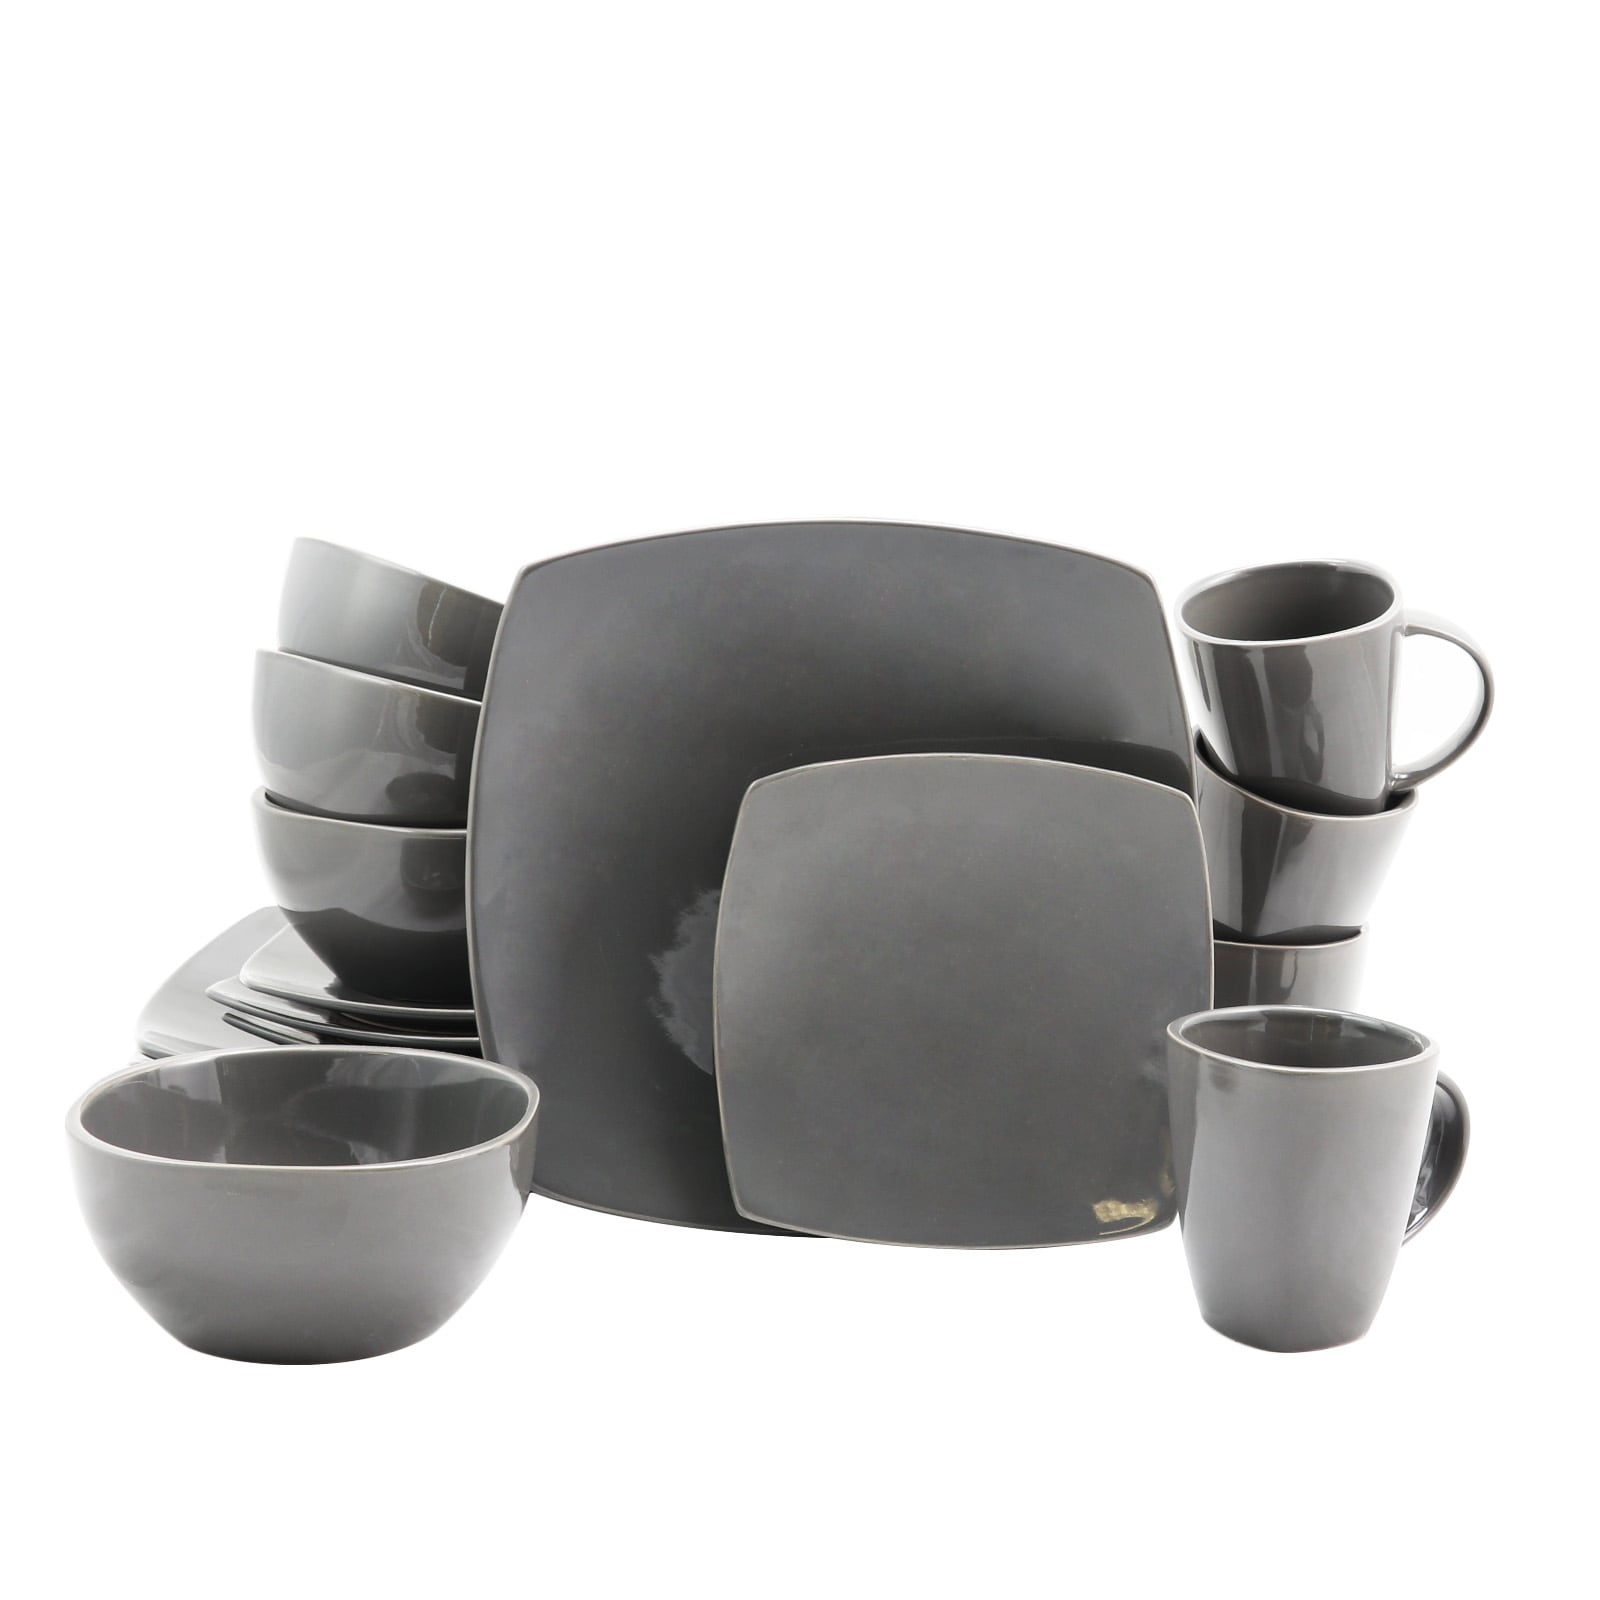 https://ak1.ostkcdn.com/images/products/is/images/direct/1f489bbe227ff296c4d72096a46966ab49ba0604/Soho-Lounge-16-Piece-Square-Dinnerware-Set%2C-Gray.jpg